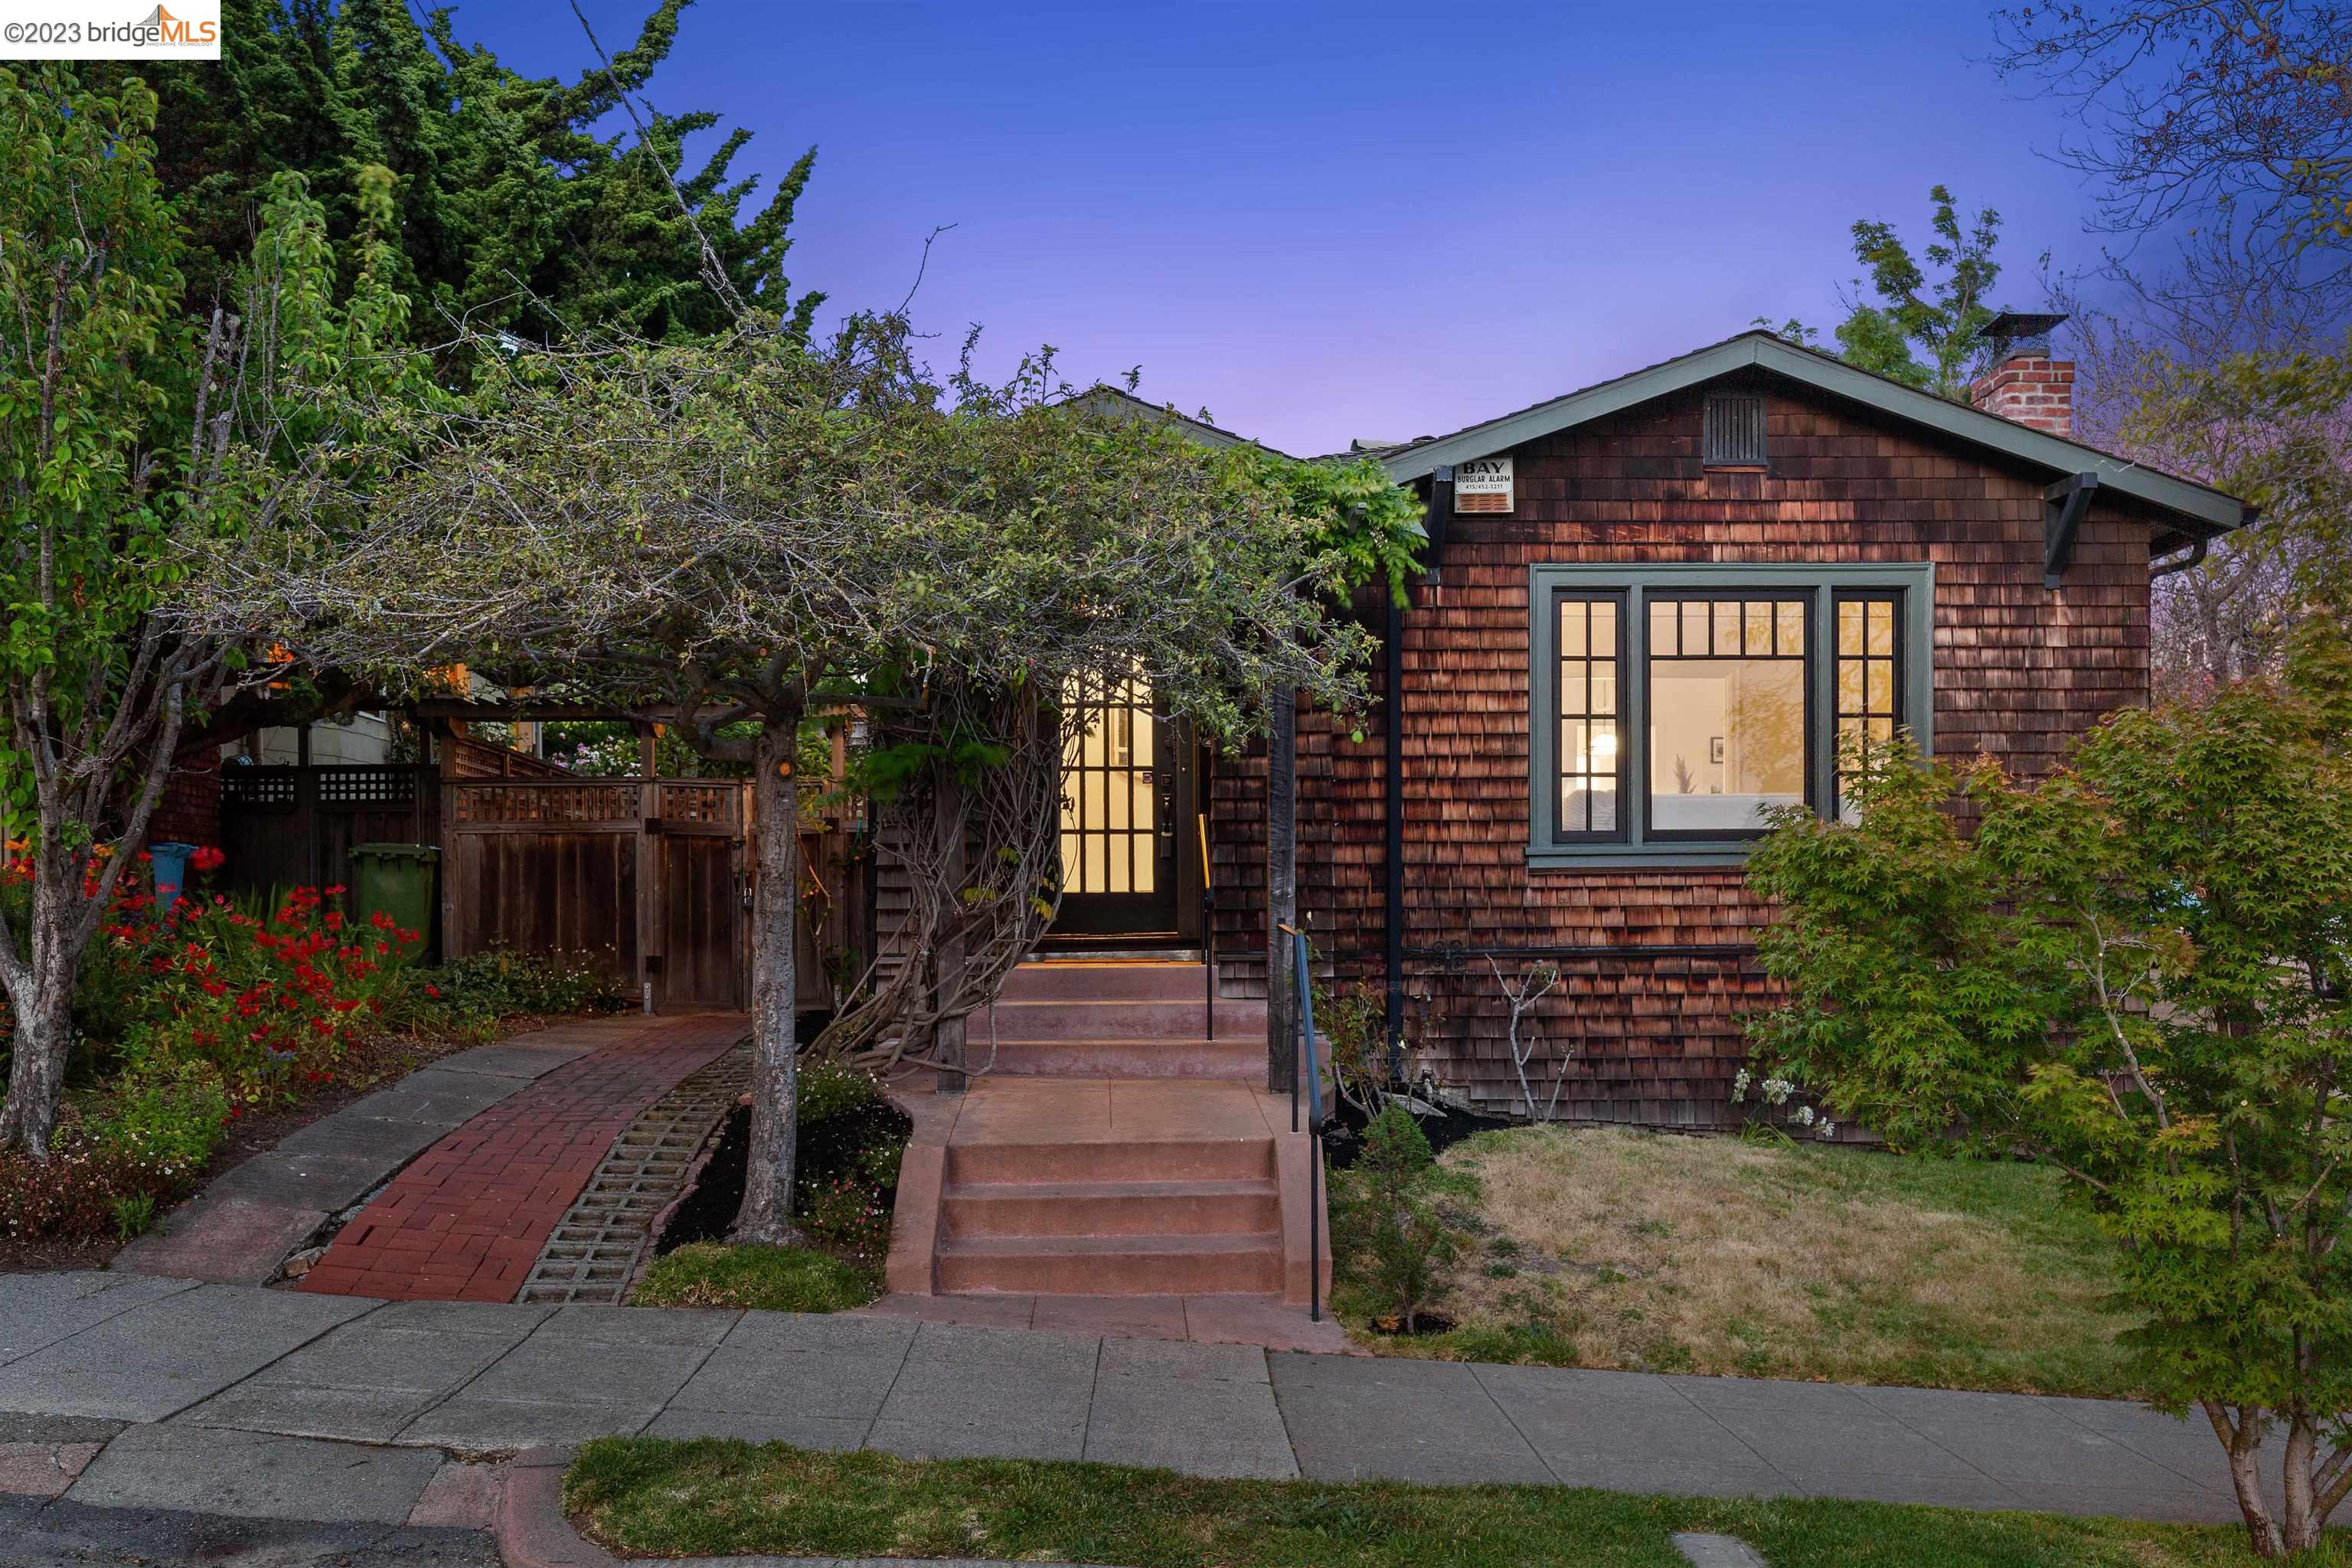 Owned since 1985 by Berkeley’s David Lance Goines, this charming 1923 brown-shingled craftsman is quintessential Berkeley! Inside, an abundance of original details, including oversized baseboards, picture trim moldings, and period light fixtures. Set on a corner lot & wrapped with a green lawn. The entryway is convenient for coats & keys. From there, wood floors & original windows add richness. The living room features a fireplace. Spillover from the living room to the dining room which has a fresh coat of paint paired with the original light & built-ins. Both bedrooms are served by a refreshed bathroom: new vanity, light & modern mirror. The shower has been retiled & the historic tile floors stay! A kitchen is as cute as can be— it’s minimalist in design, with maximum storage. While the Wedgwood stove is the star of the room, high-quality cabinets impress. Adjacent is a breakfast nook. The laundry room serves as access to the backyard as well as a pantry. In the yard, a deck, mature trees, foliage, old bricks & fountain statue. Has a finished garage; continue using it as an art studio or modify to park here again. Don't miss your chance to own a piece of Berkeley history in one of its most desirable neighborhoods, Northbrae.